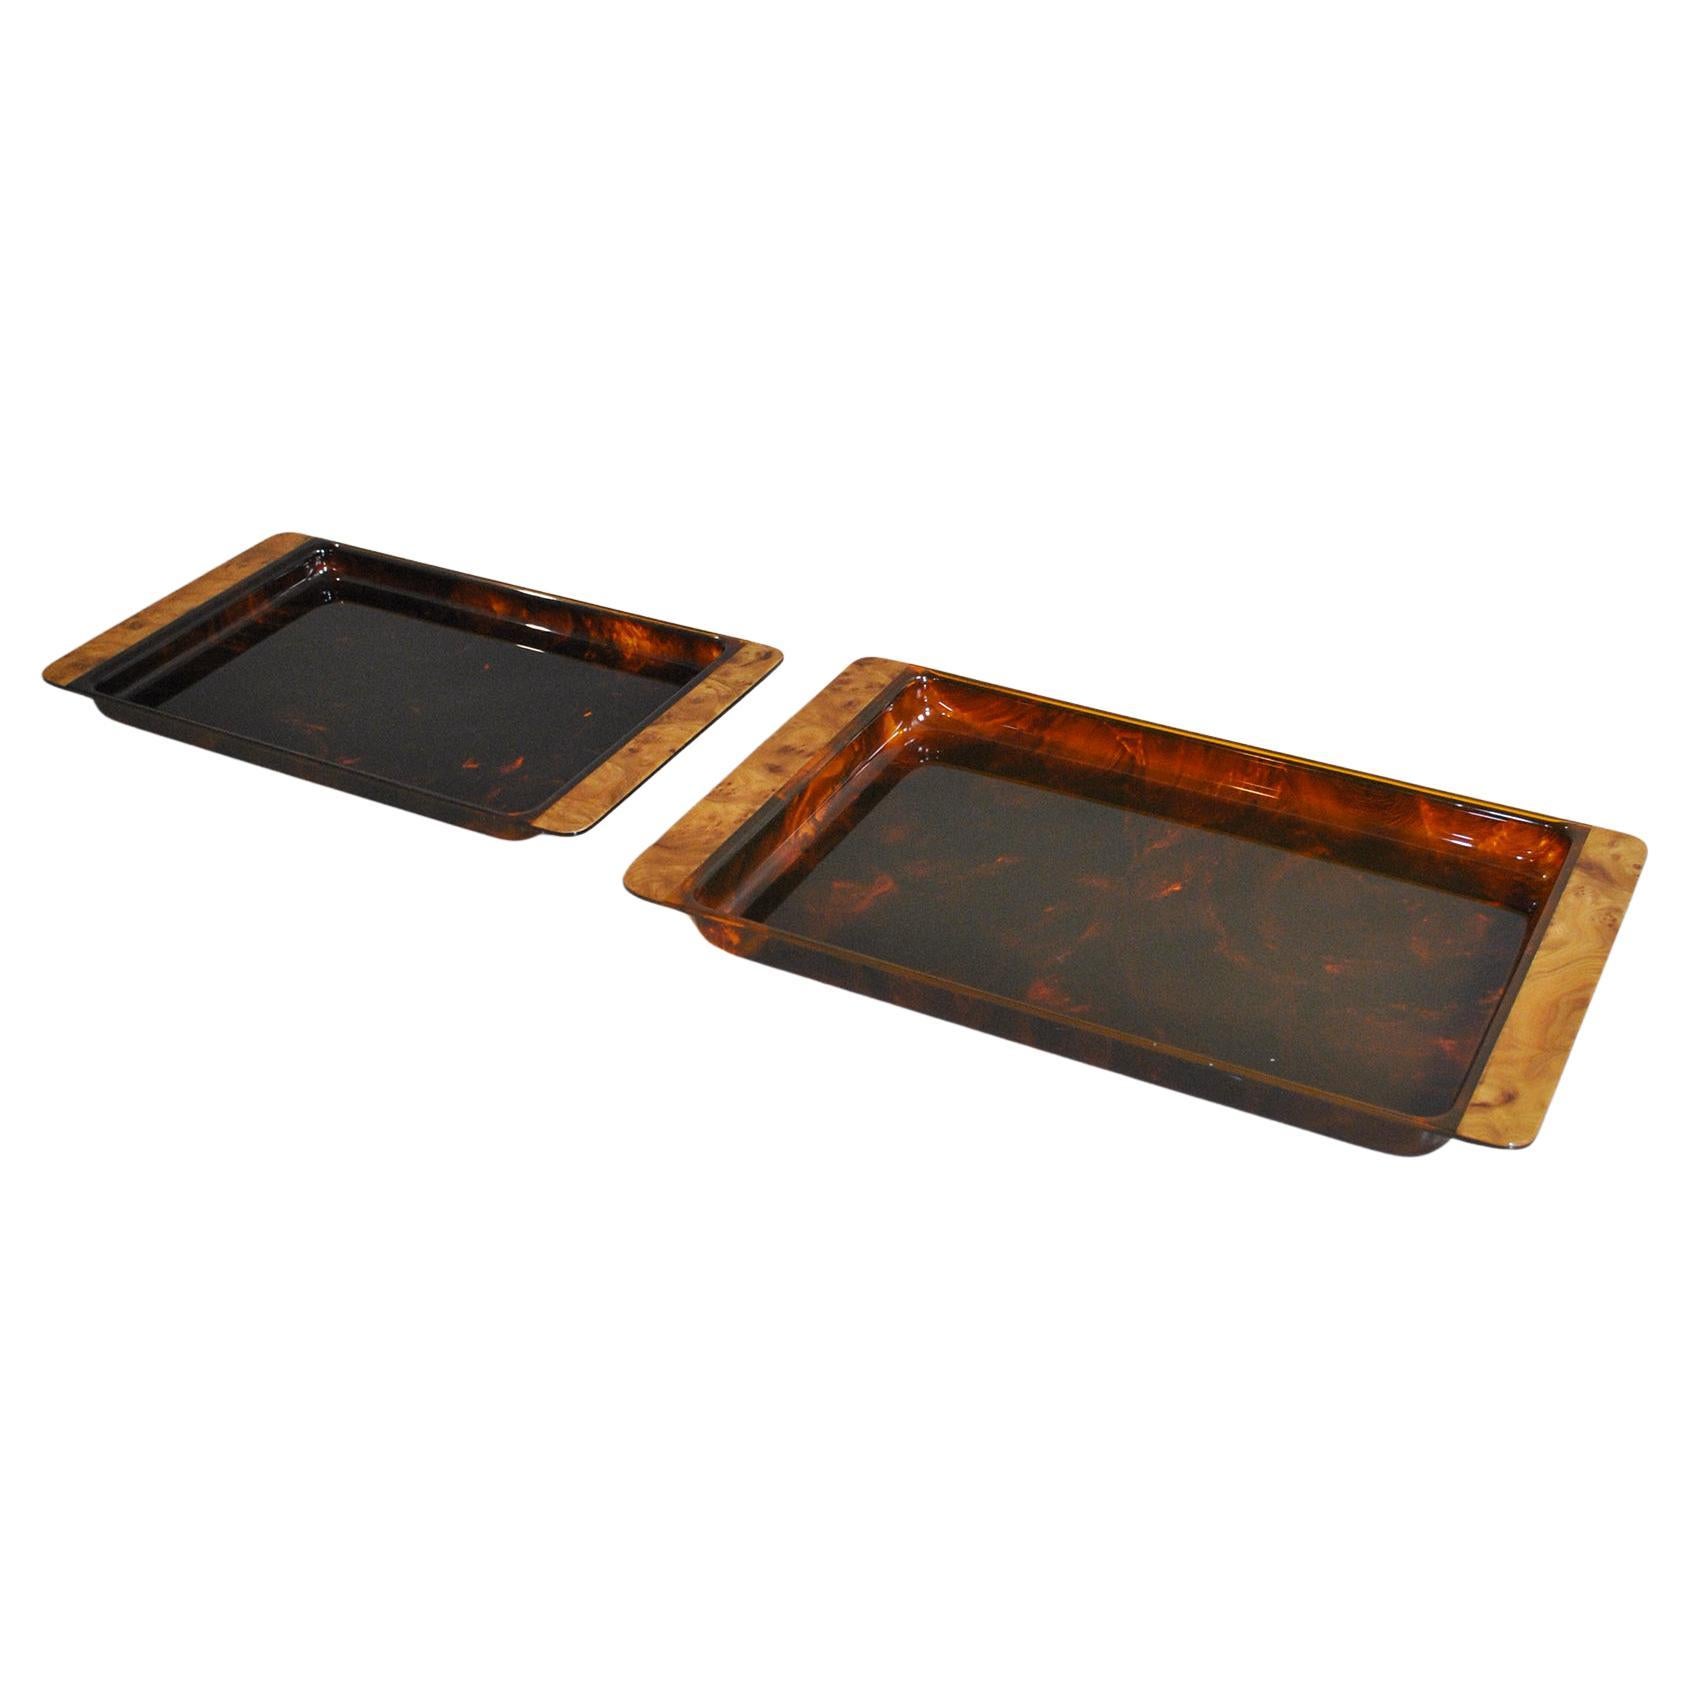 Set of two tray in tortoiseshell plex with handles in briar-like in the style of Willy Rizzo from the seventies.